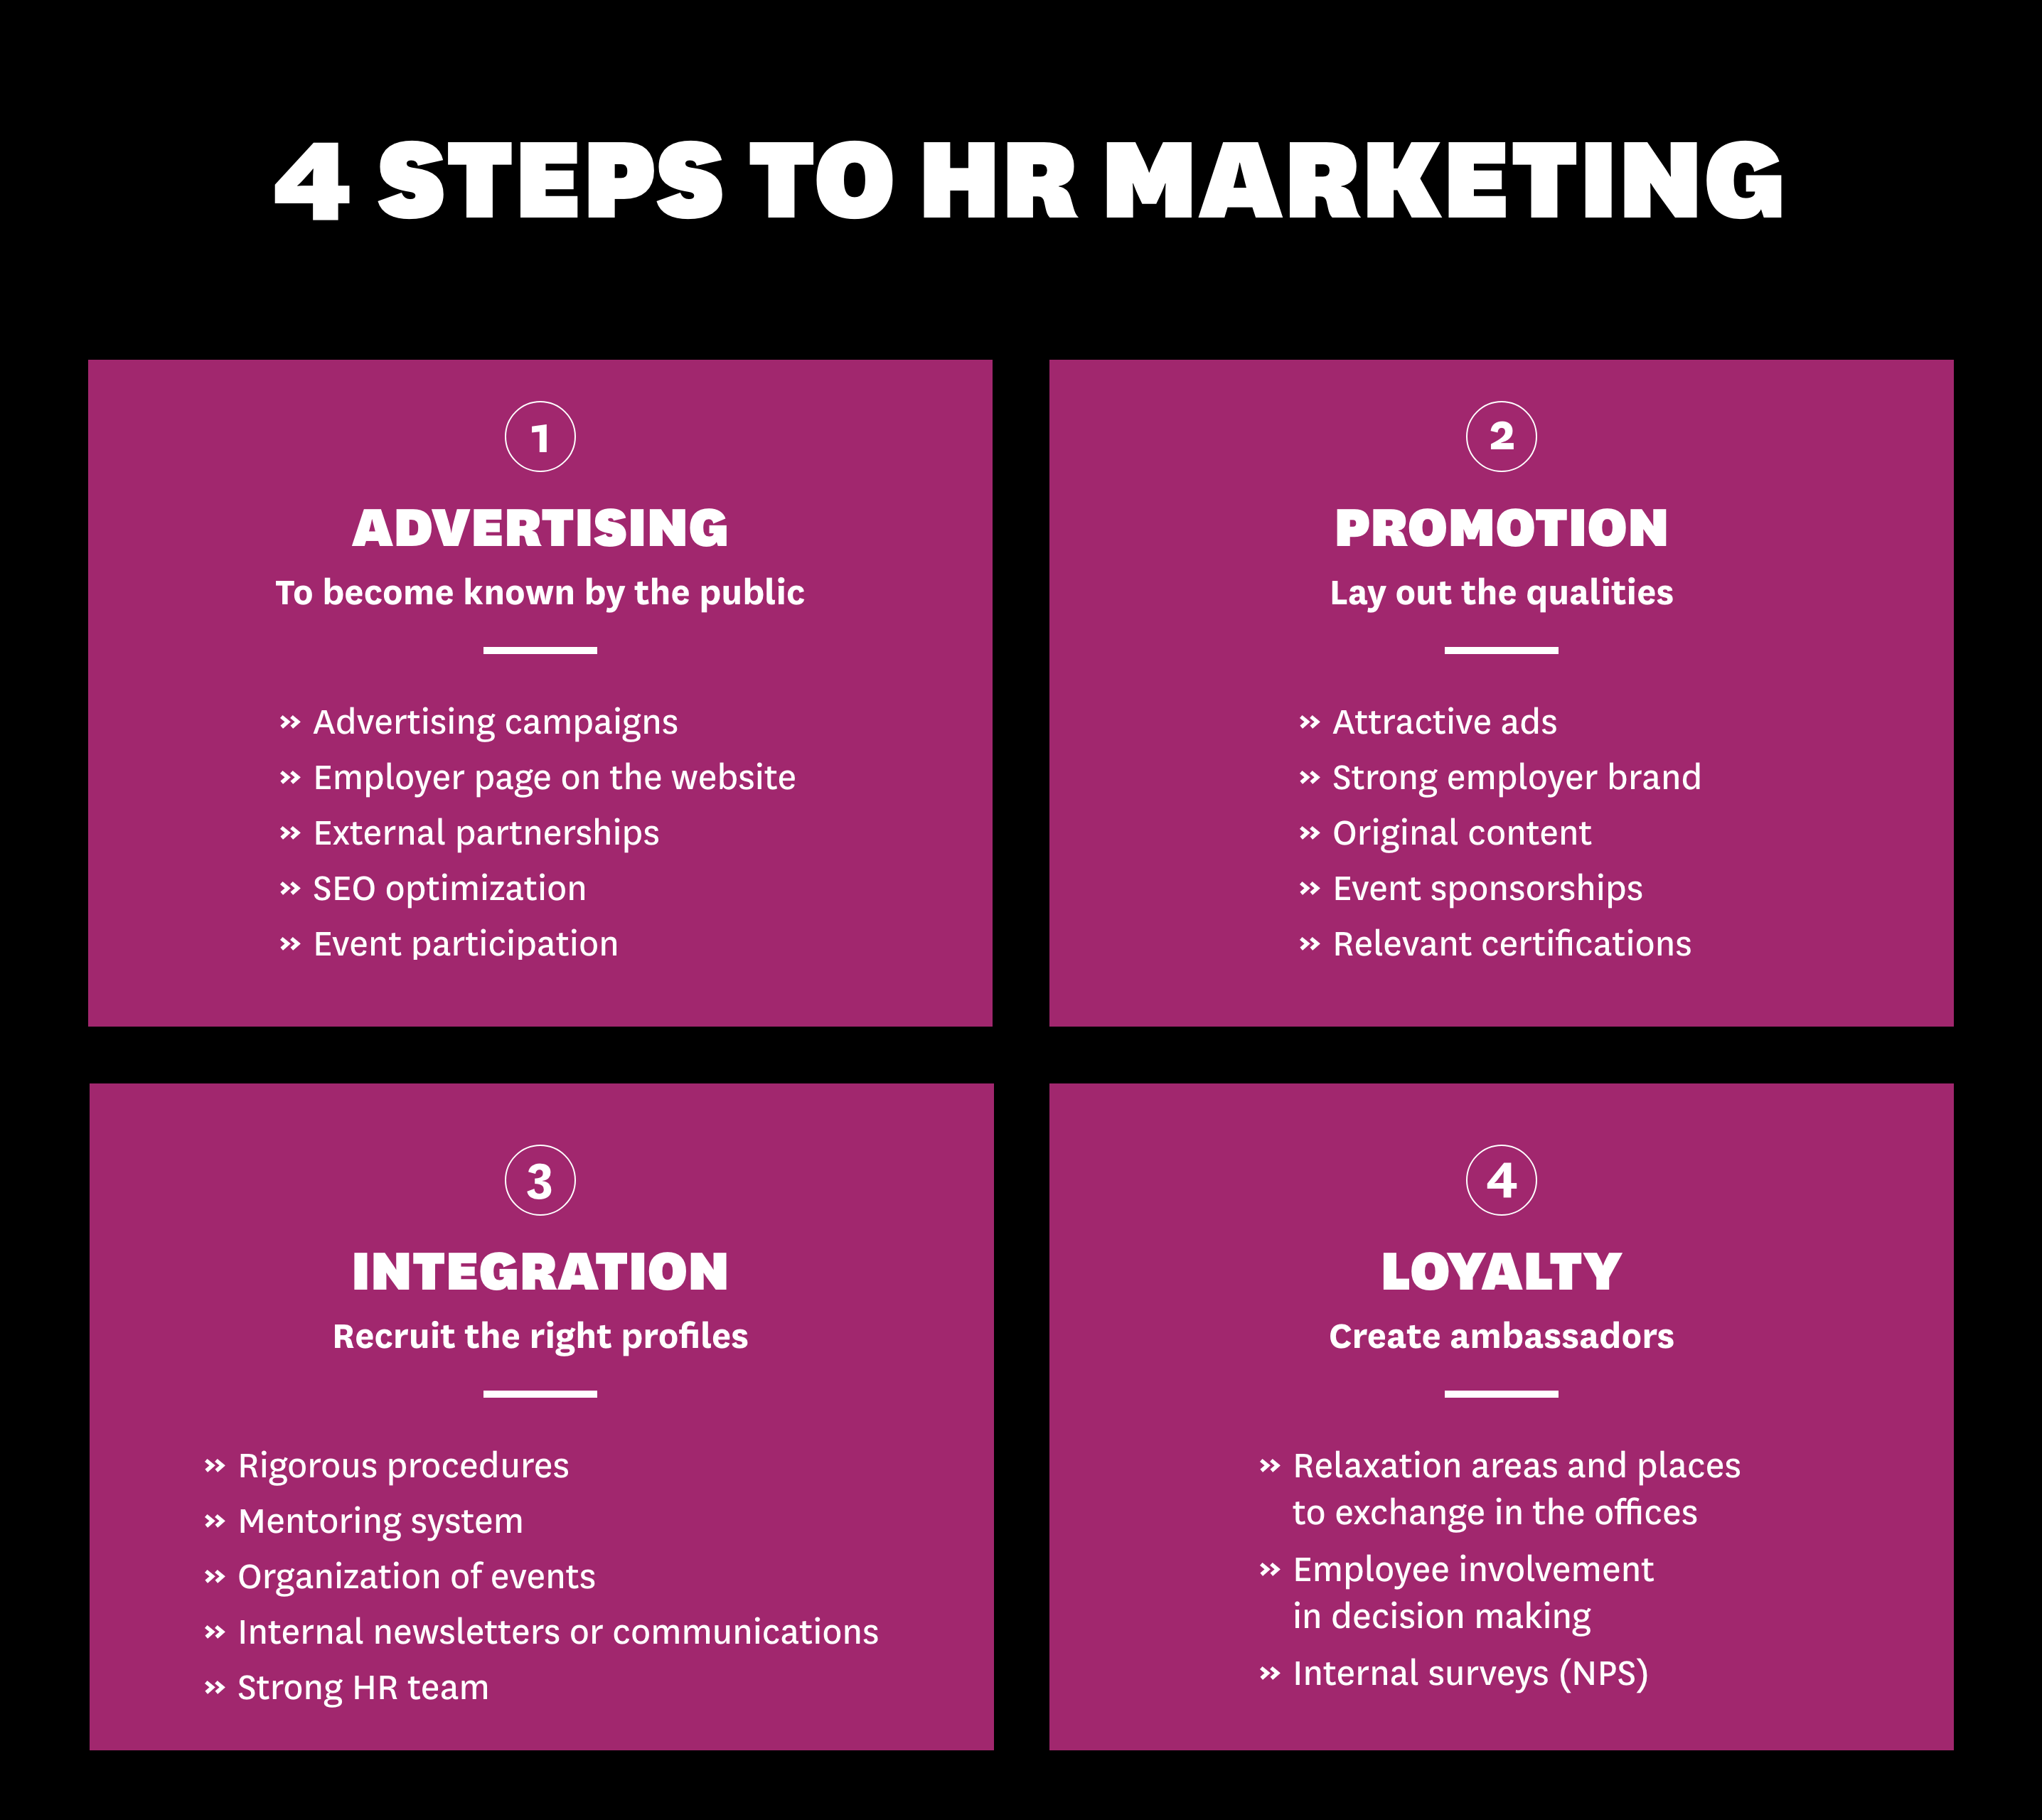 How to Implement HR Marketing in Your Company